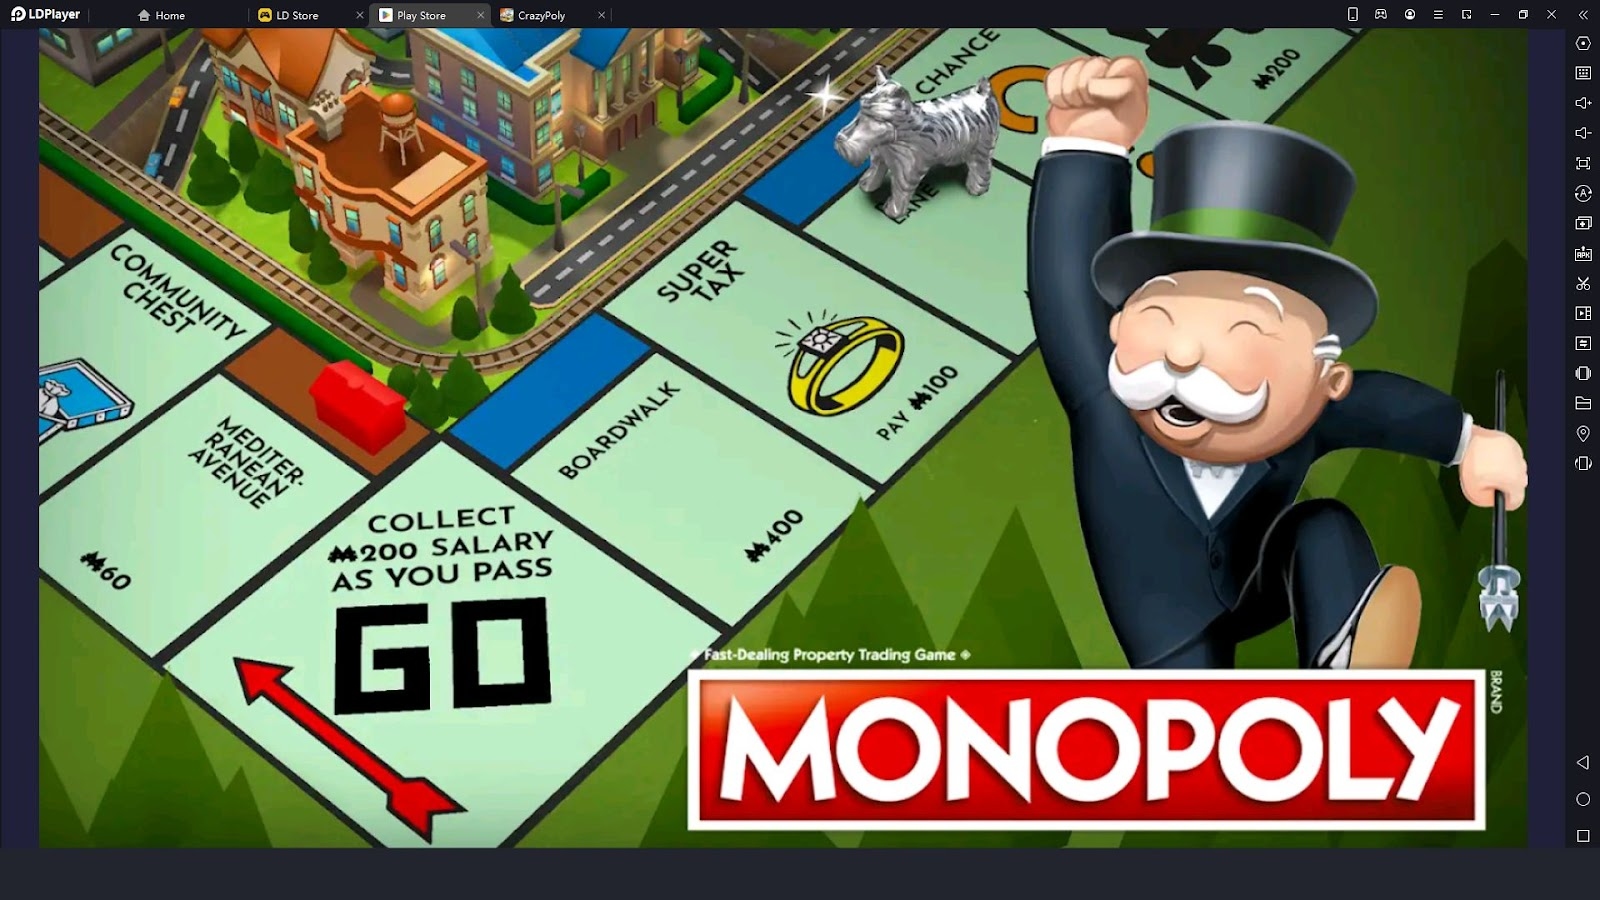 MONOPOLY Tycoon – Apps on Google Play